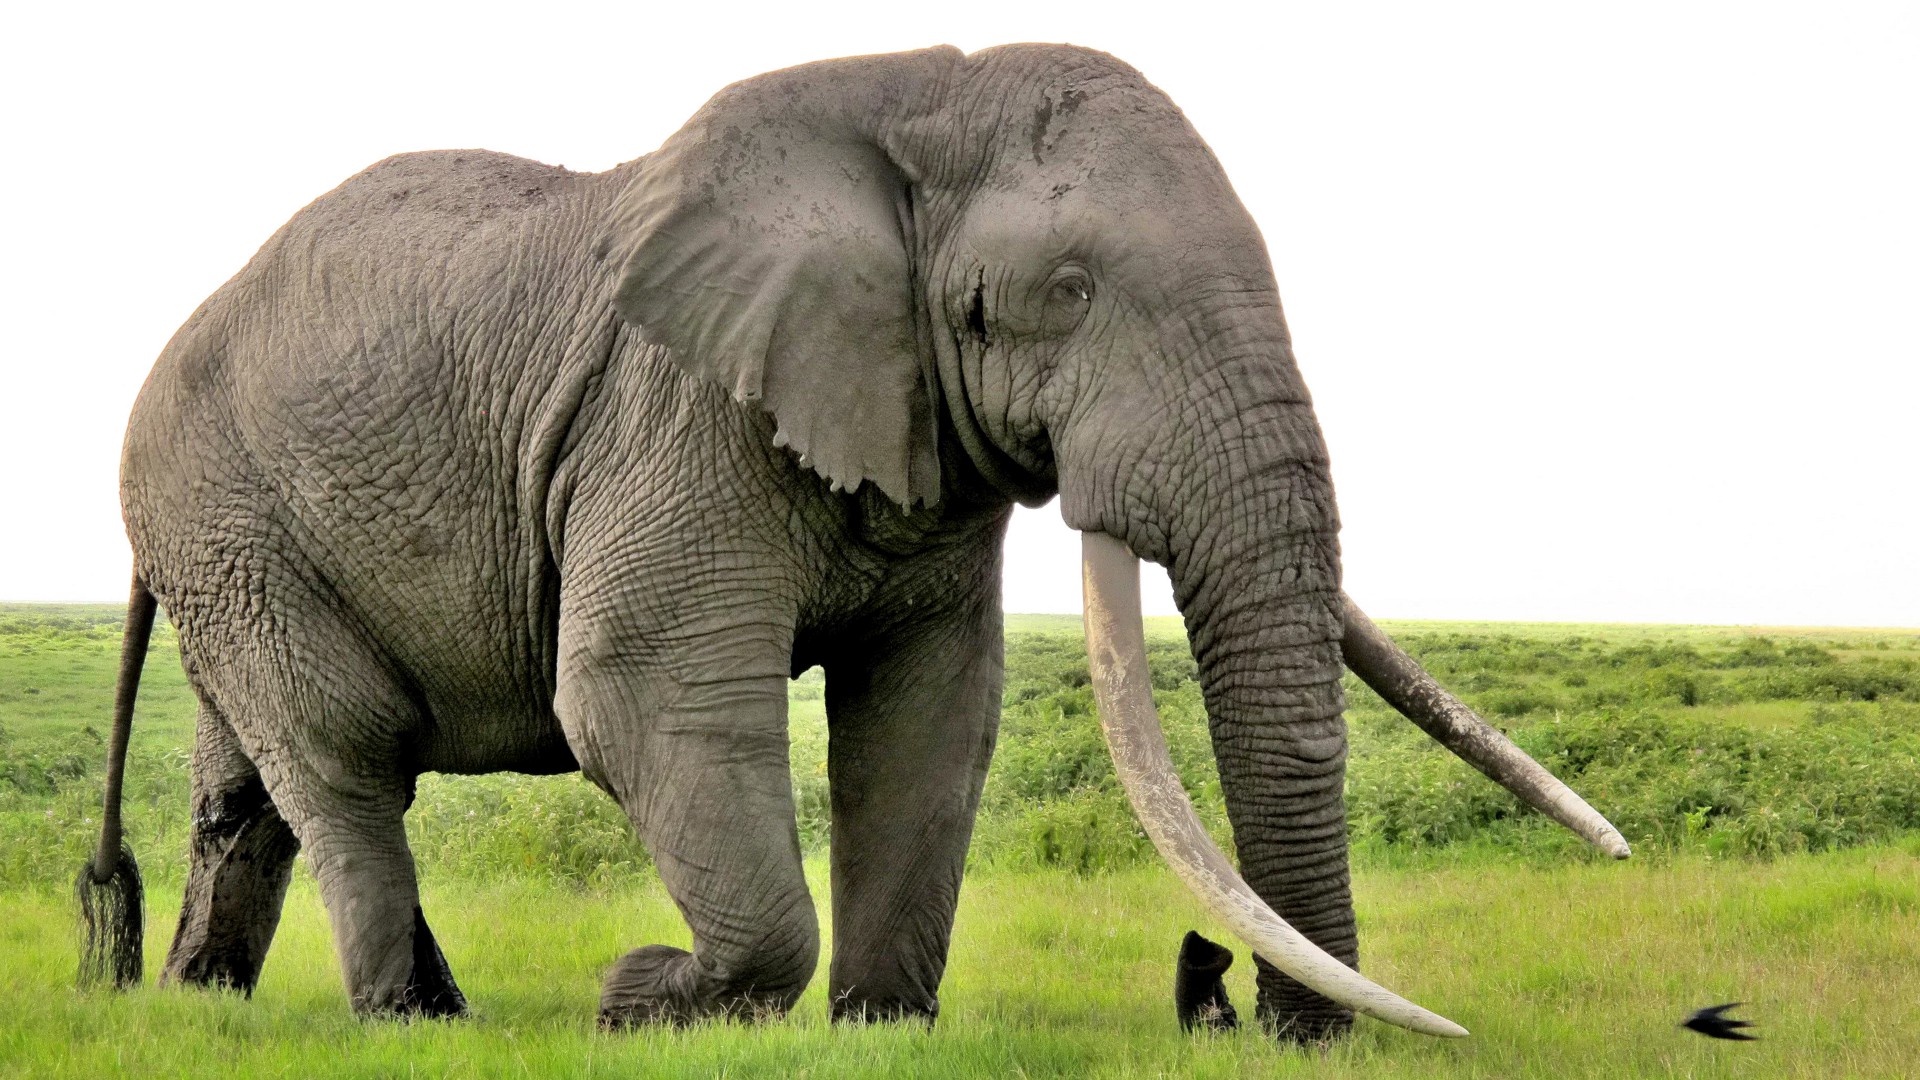 What Does It Mean That Another Giant Elephant Has Fallen?